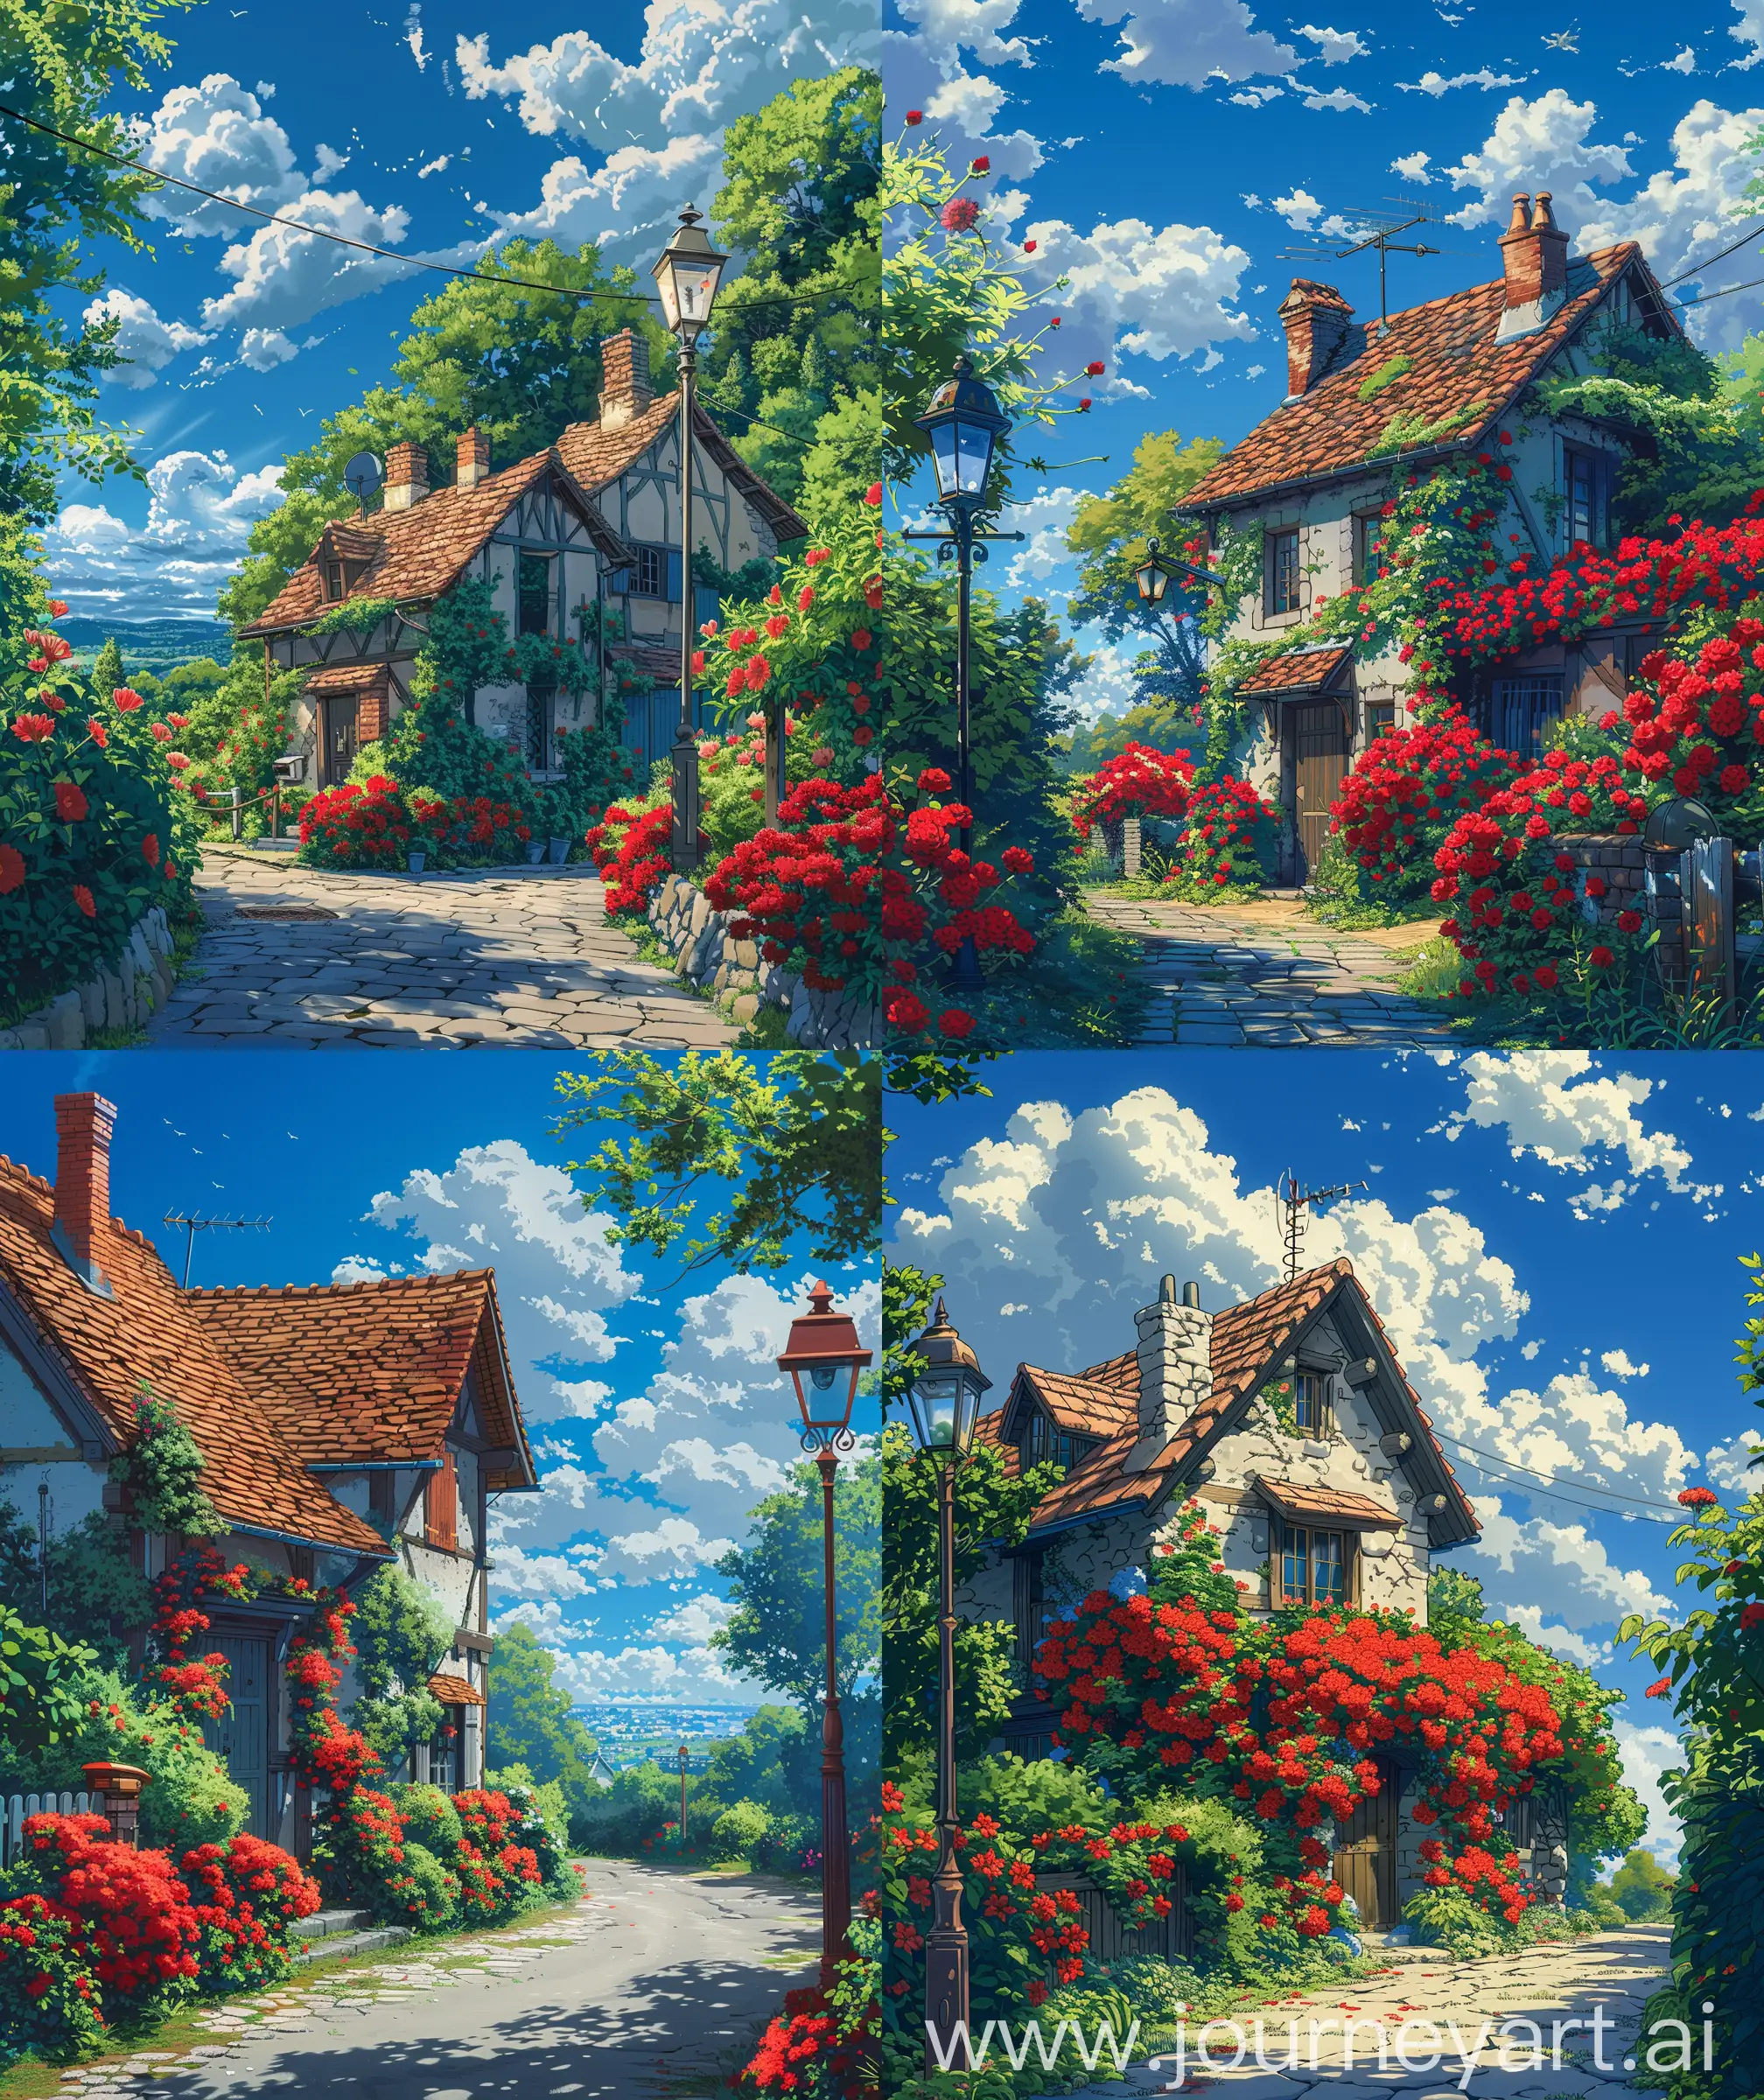 Beautiful anime scenary, mokoto shinkai and Ghibli style mix, direct front facade view of french countryside cottage look, street, pavement road, red flowers around cottage, bushes, old lamp post, blue sky", close up, vibrant look, beautiful sky, illustration, anime scenes, ultra HD, high quality, sharp details, no hyperrealistic --ar 27:32 --s 400